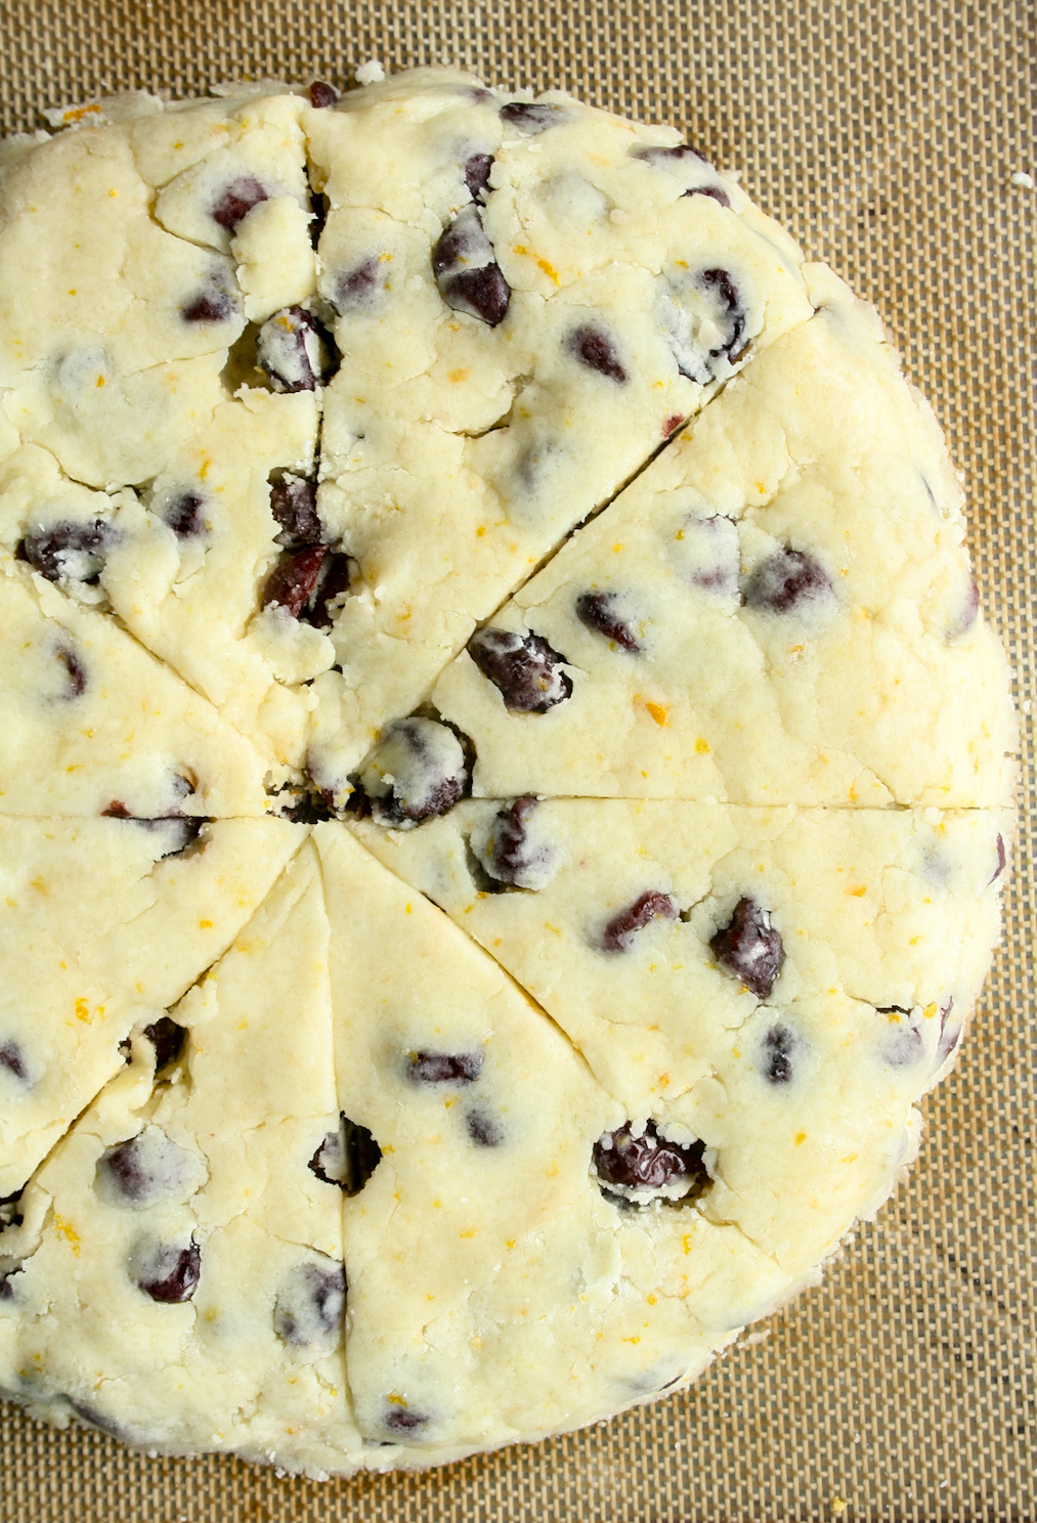 Tender, eggless scones packed with orange zest and cranberries.